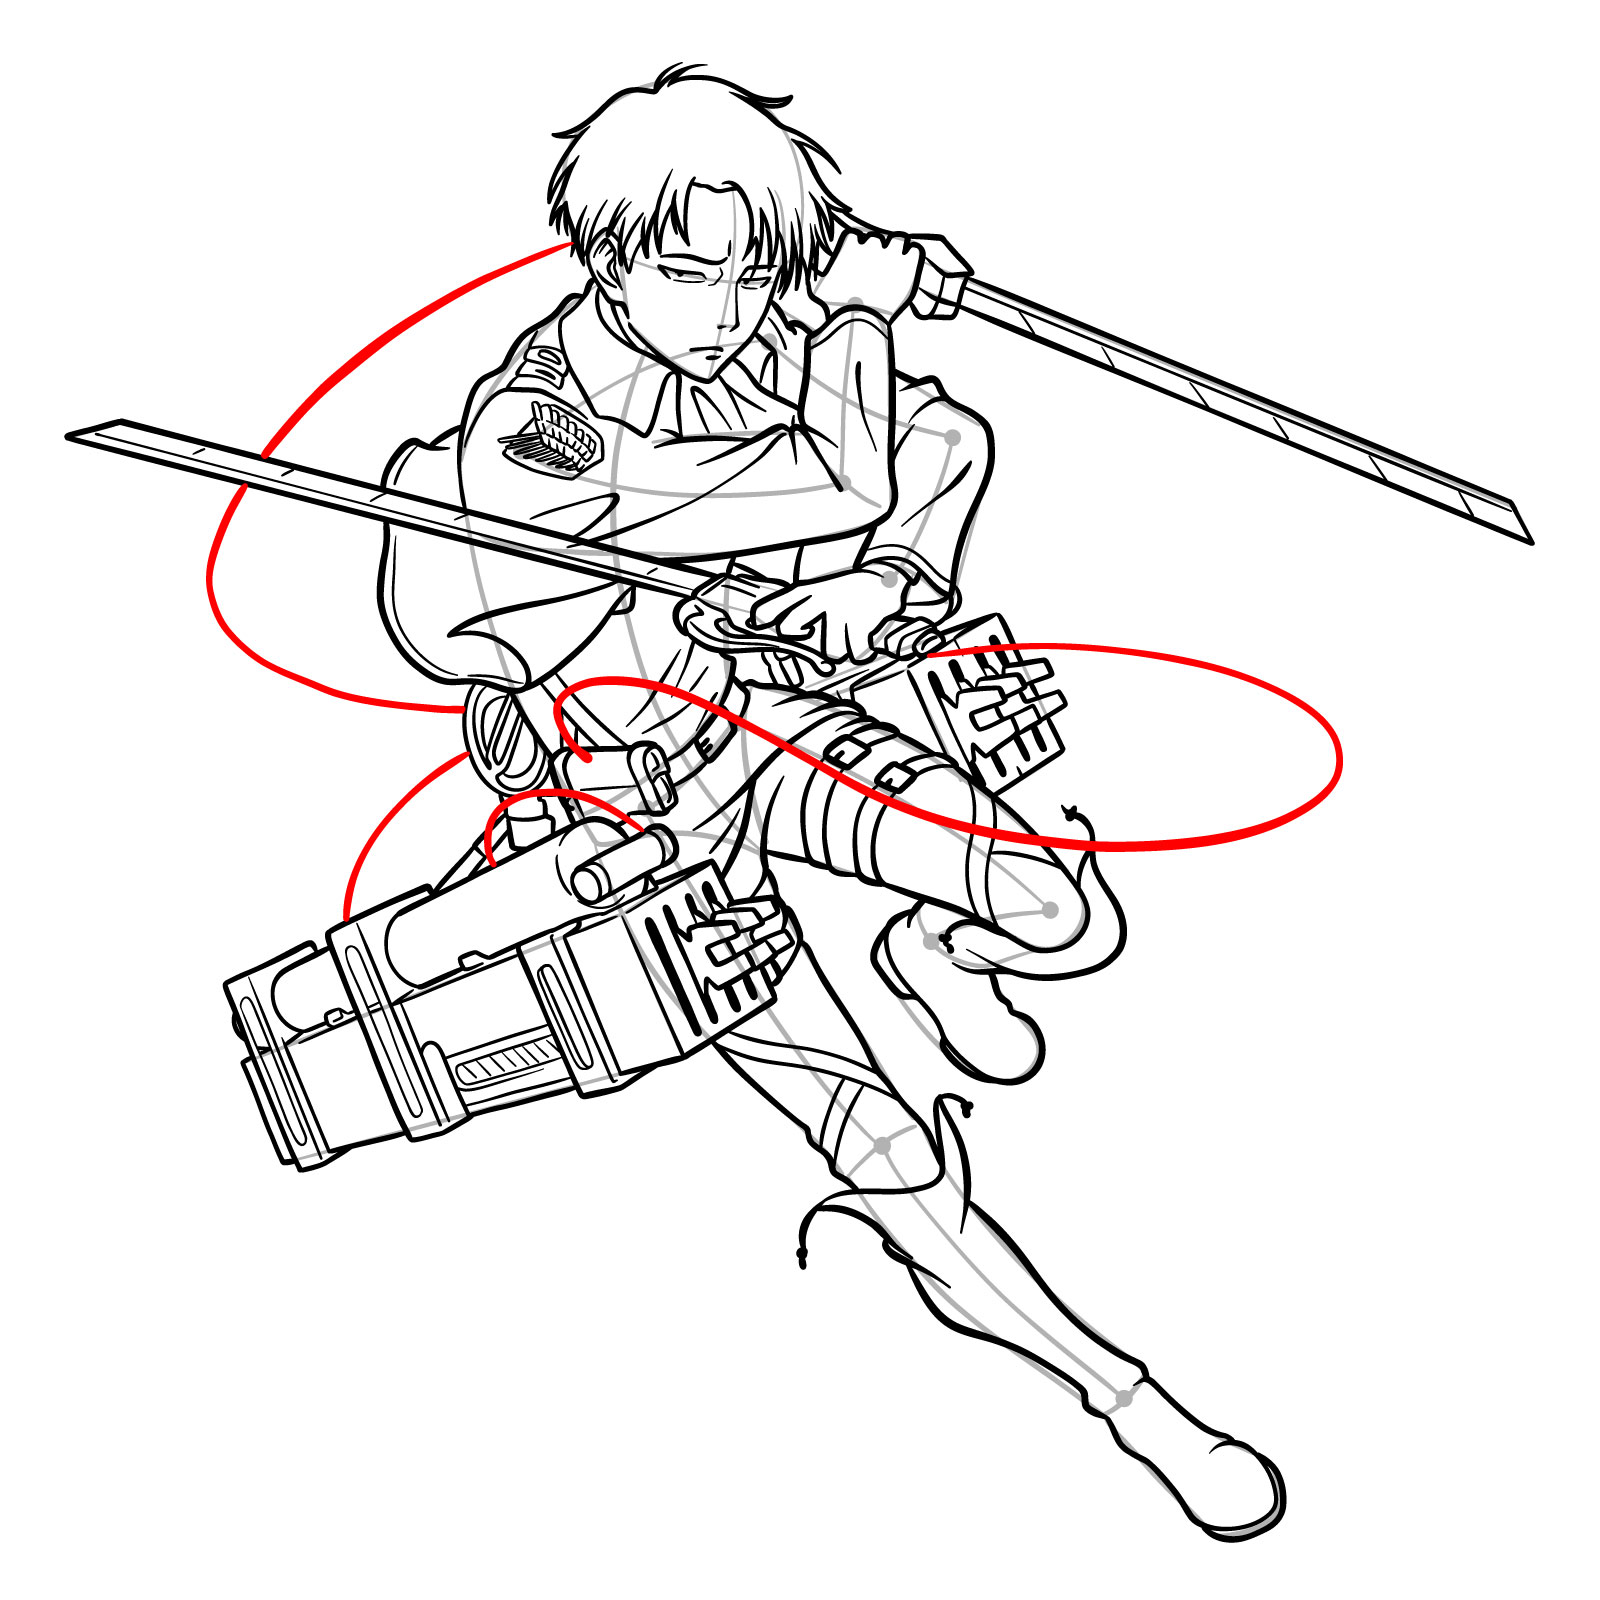 Adding the ODM gear cords to Captain Levi's dynamic action pose - step 38